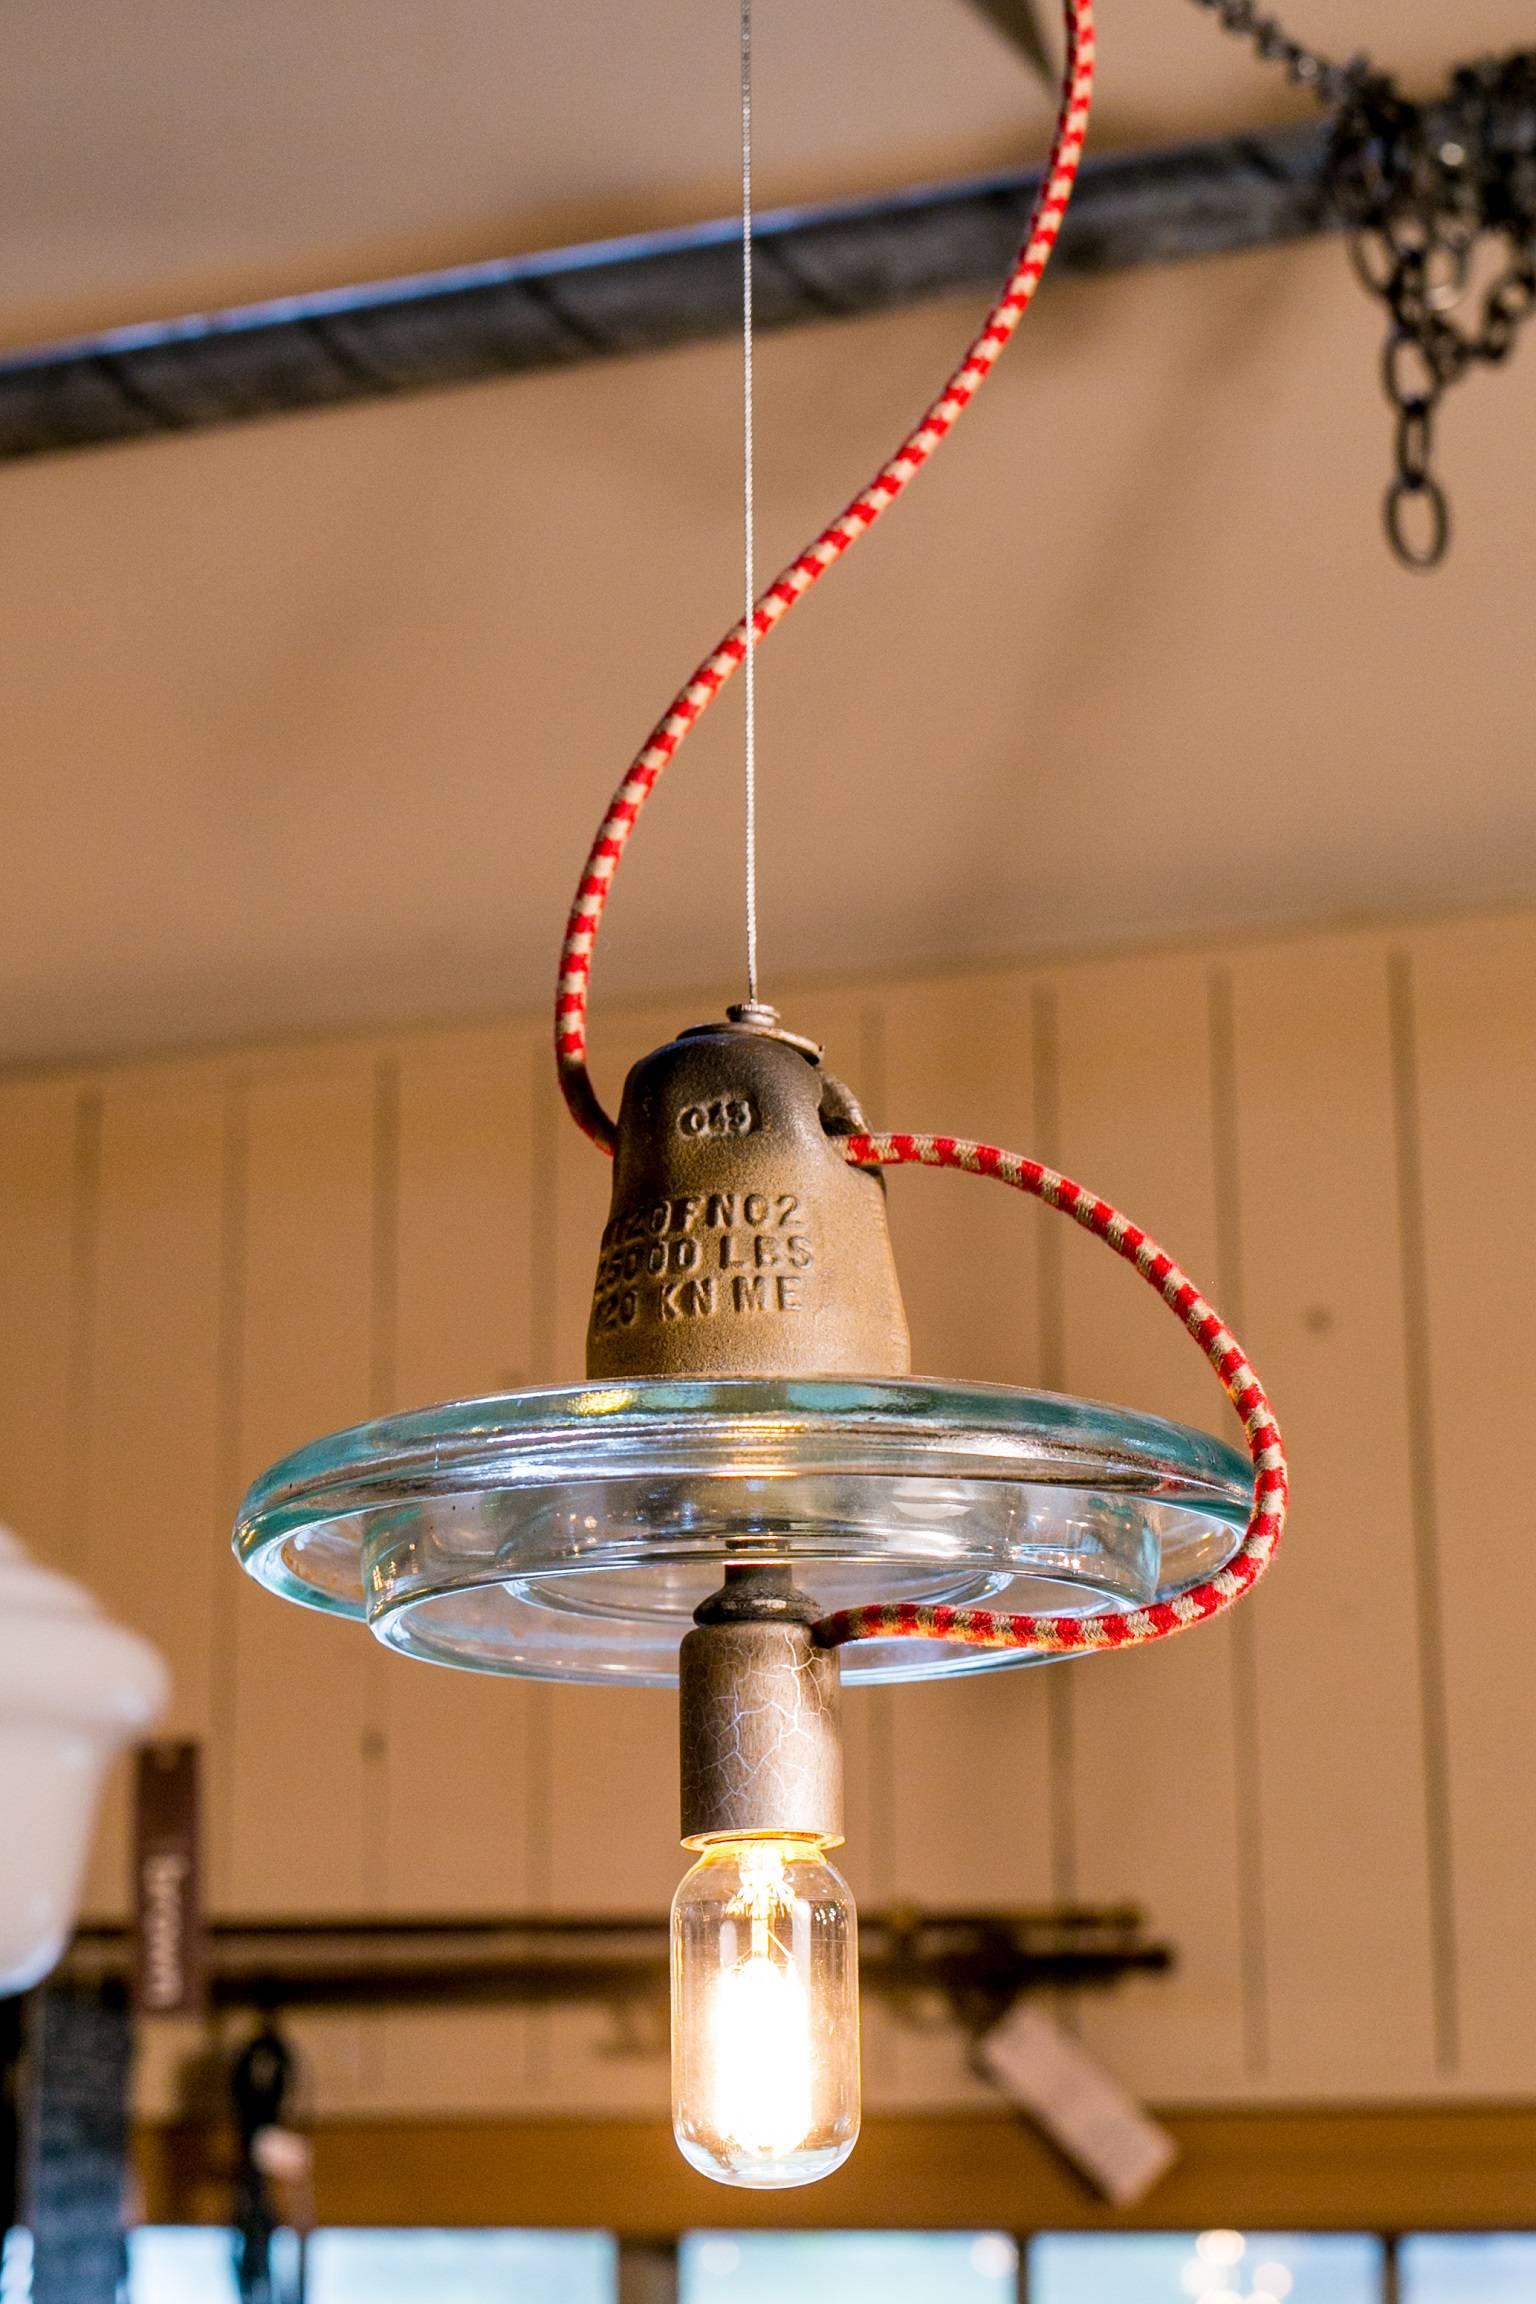 Vintage, Industrial glass disc pendants from a Belgian factory with new colored cords. Heavy glass with a steel cable and round plug end. Newly wired in the US with UL approved parts and porcelain Edison socket. Multiples available, price is for one